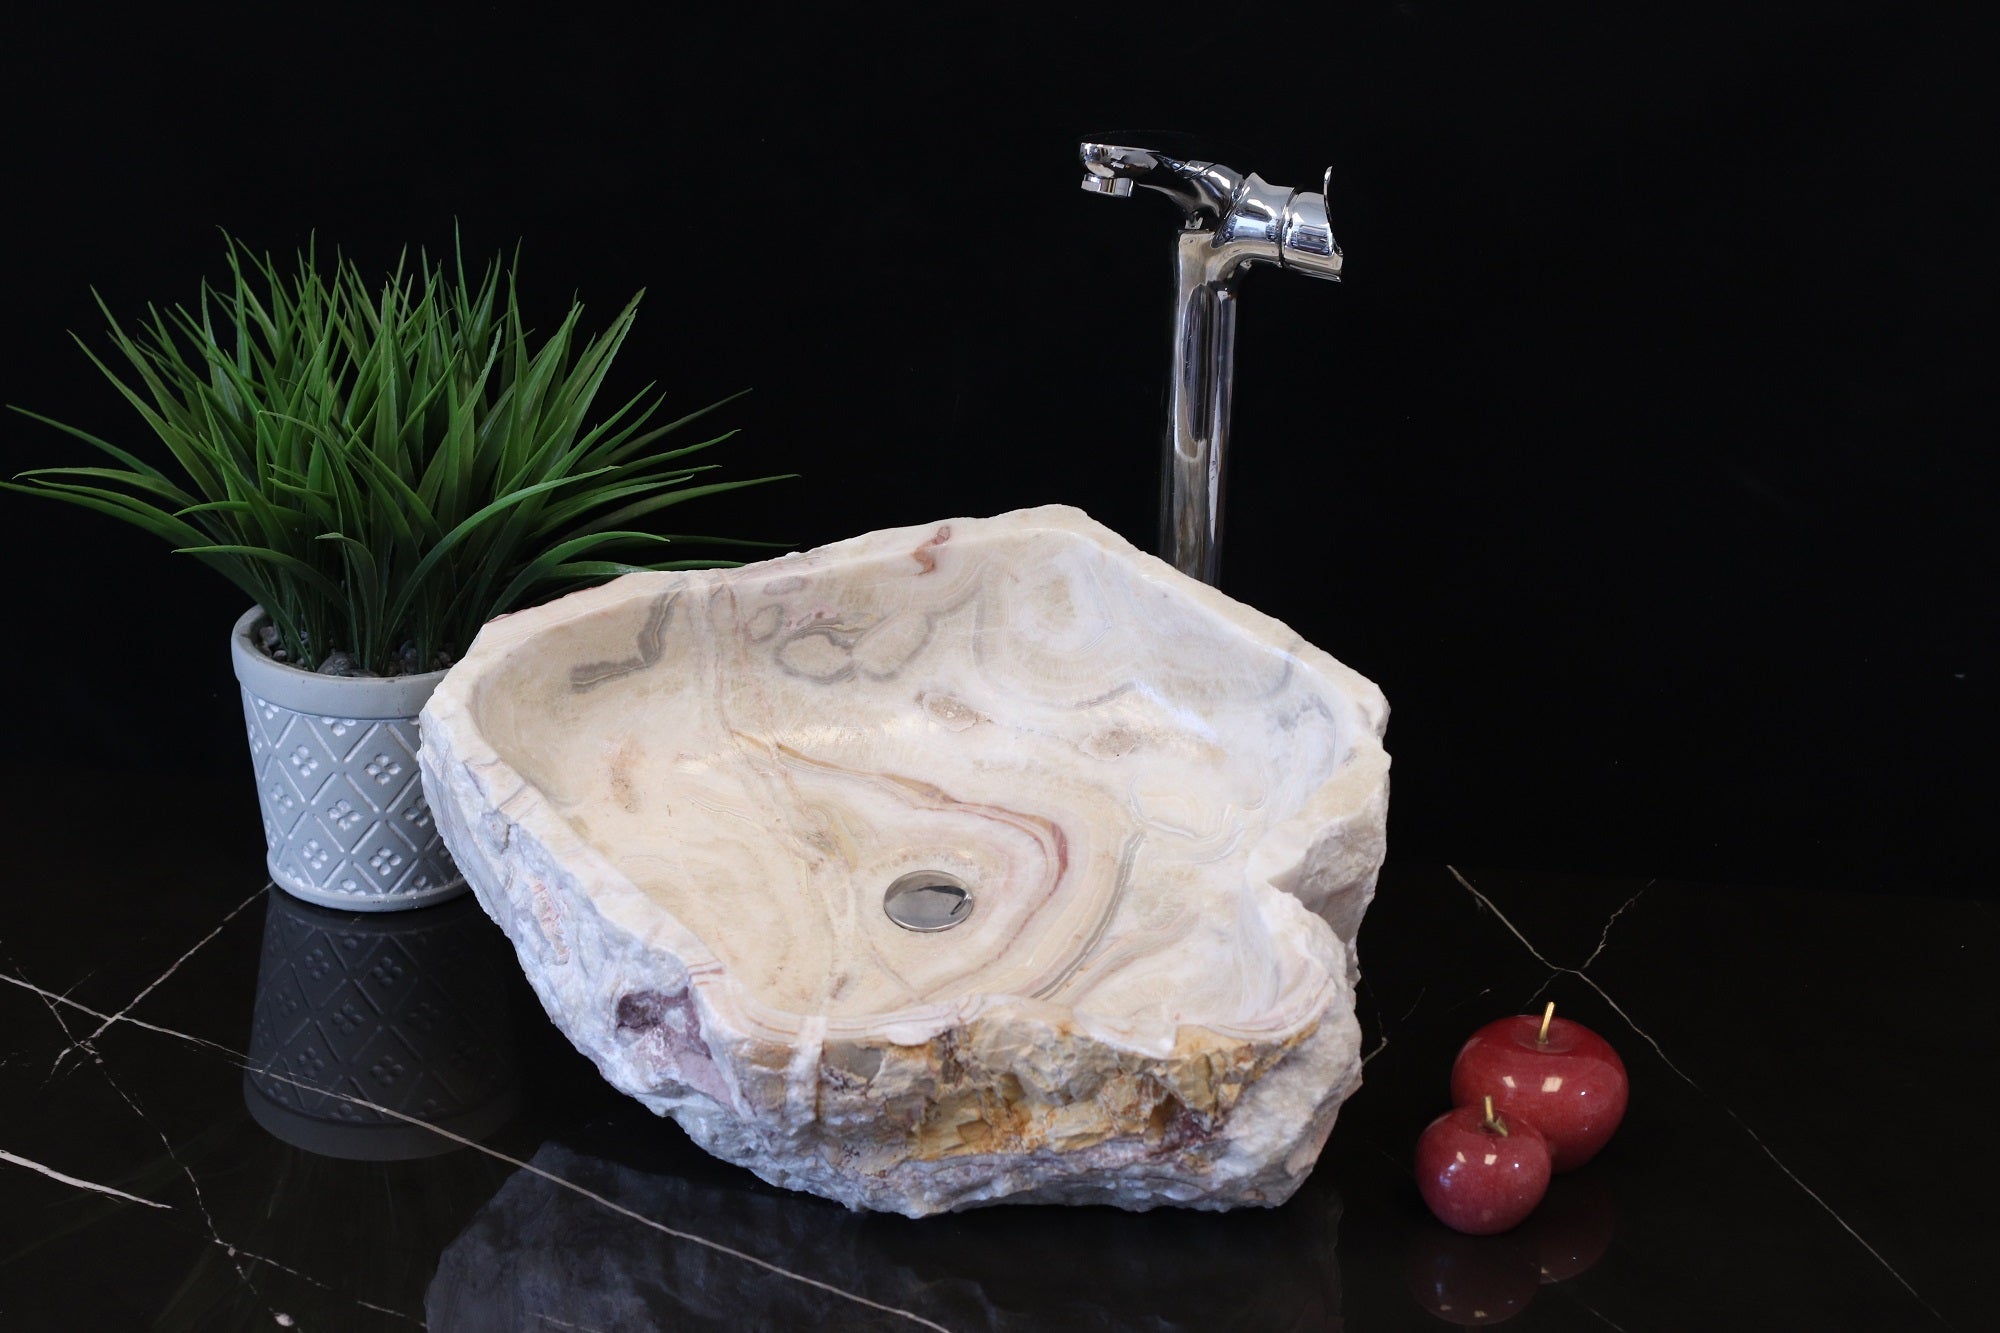 Ivory and Cream Onyx Vessel Sink. A beautiful work of art. We offer fast shipping. Handmade in Mexico. We hand finish, package, and ship from the USA. Buy now at www.felipeandgrace.com. 